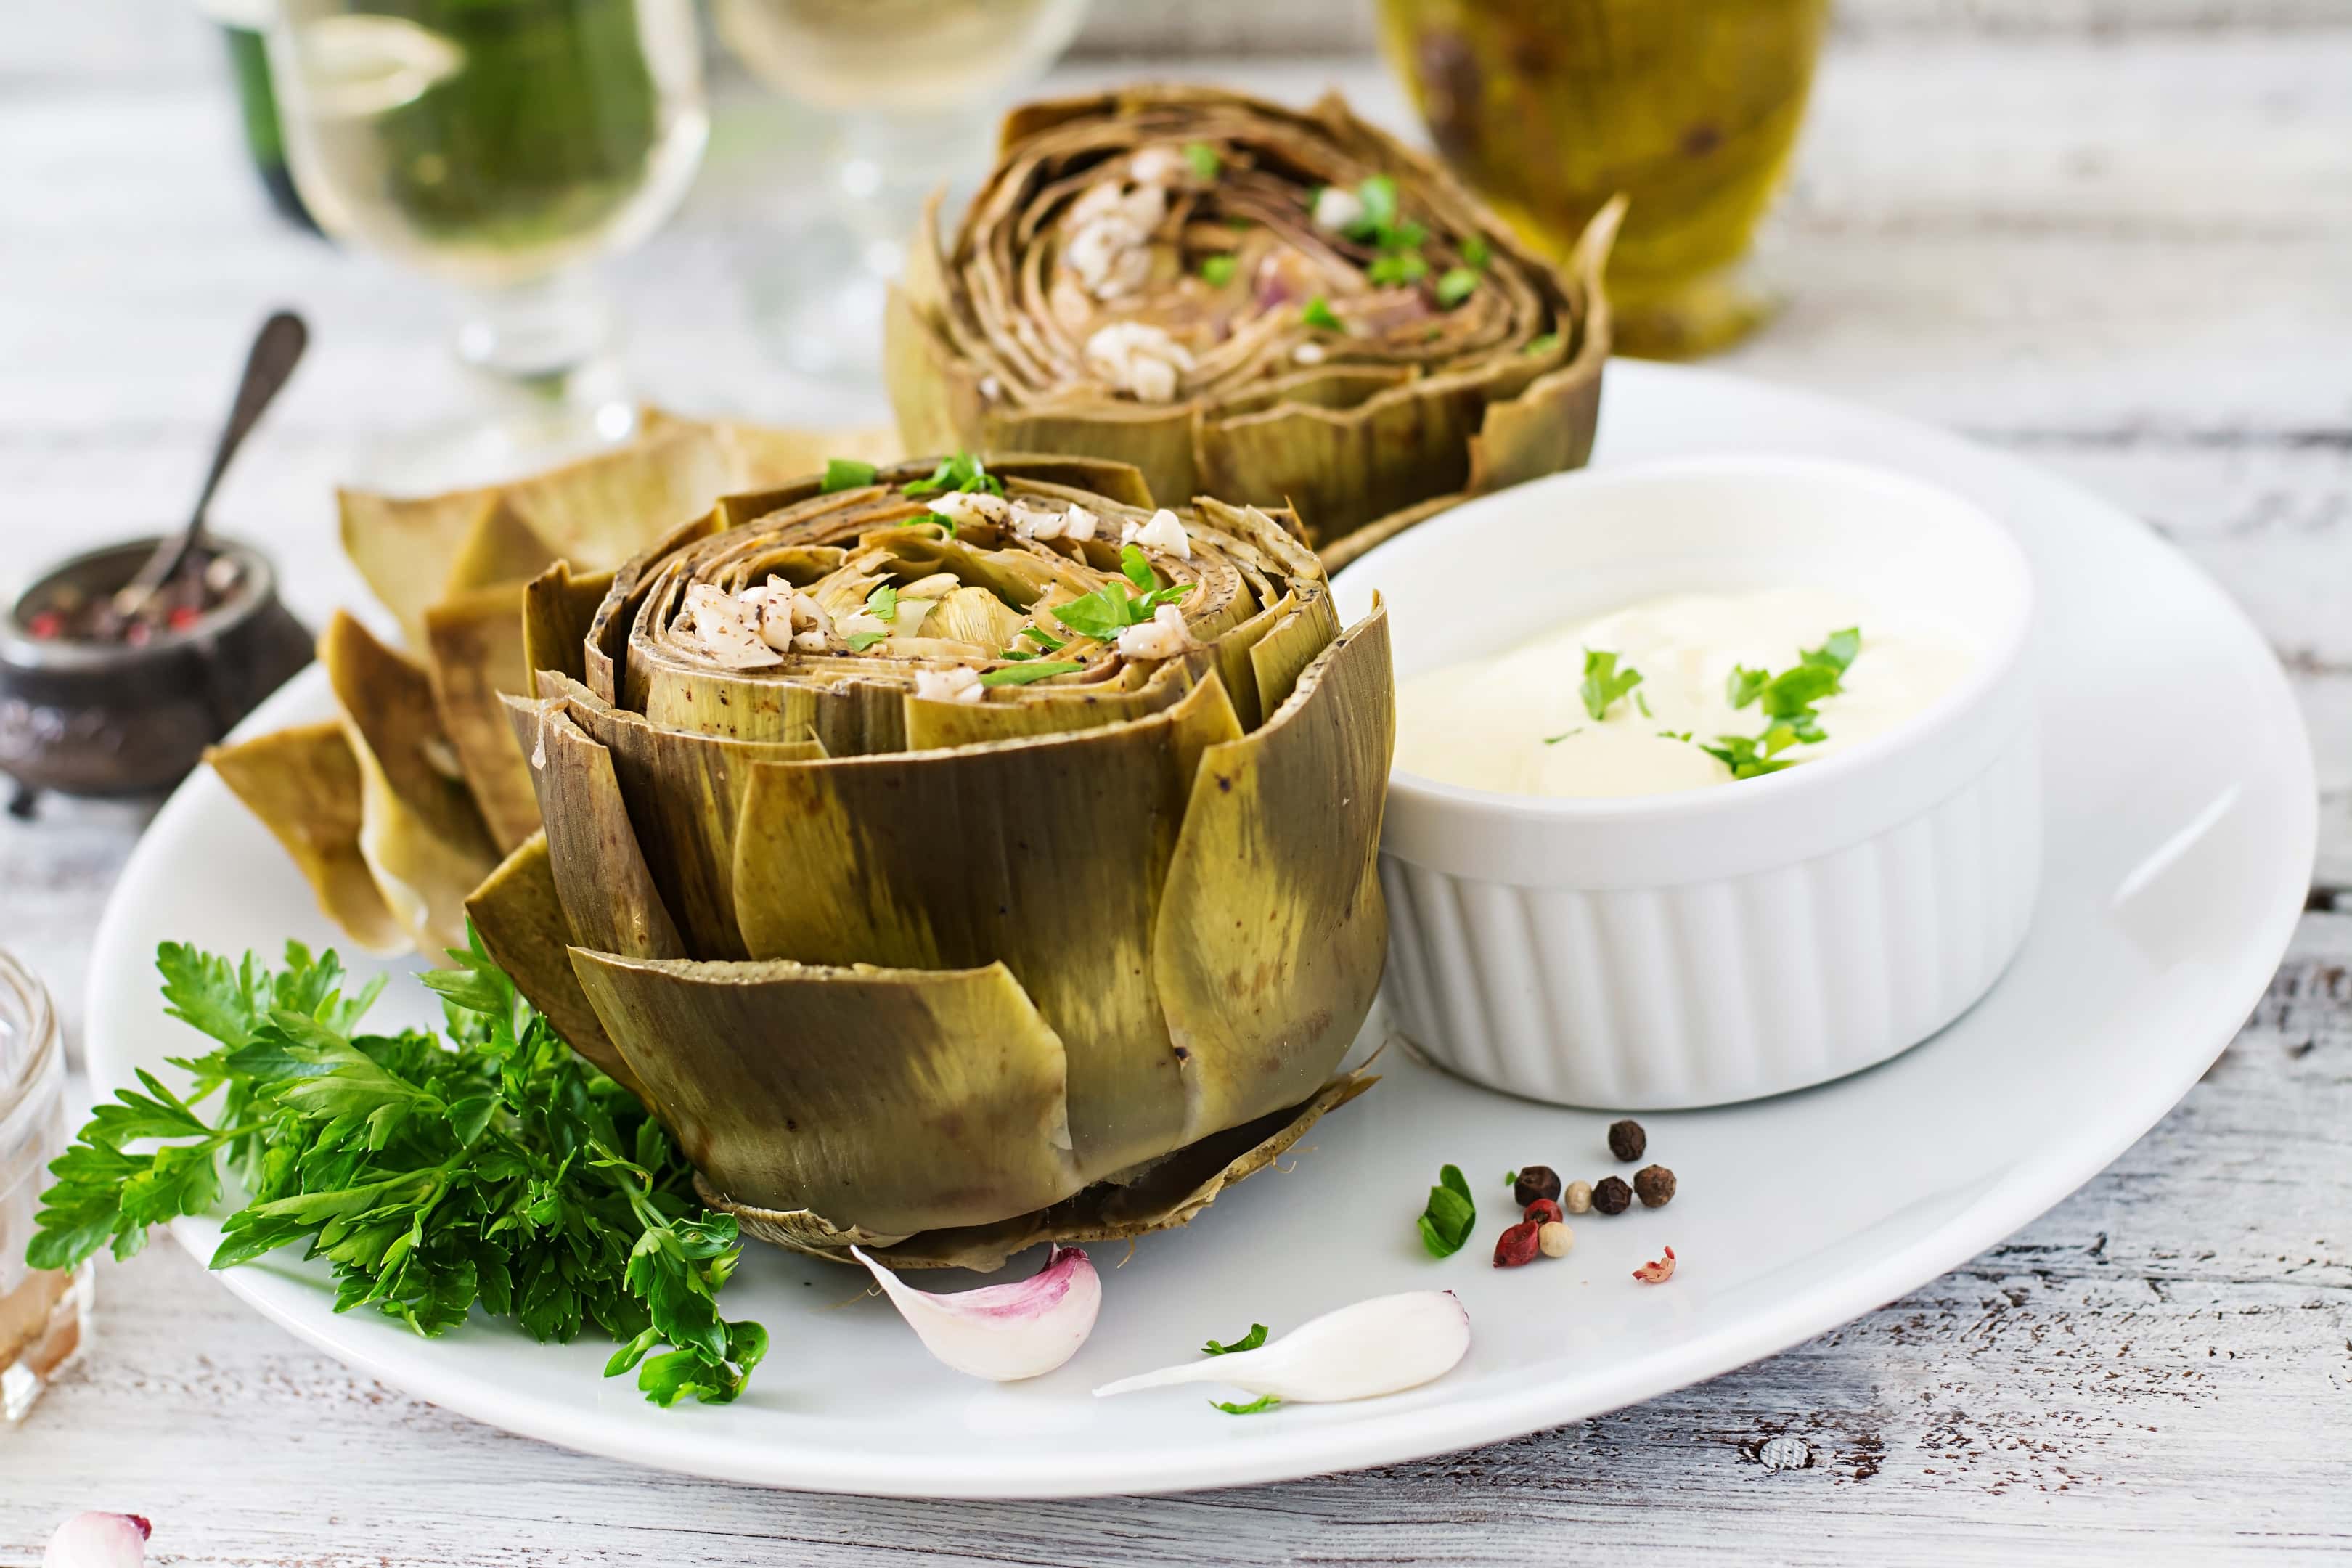 Baked artichokes cooked with mustard garlic